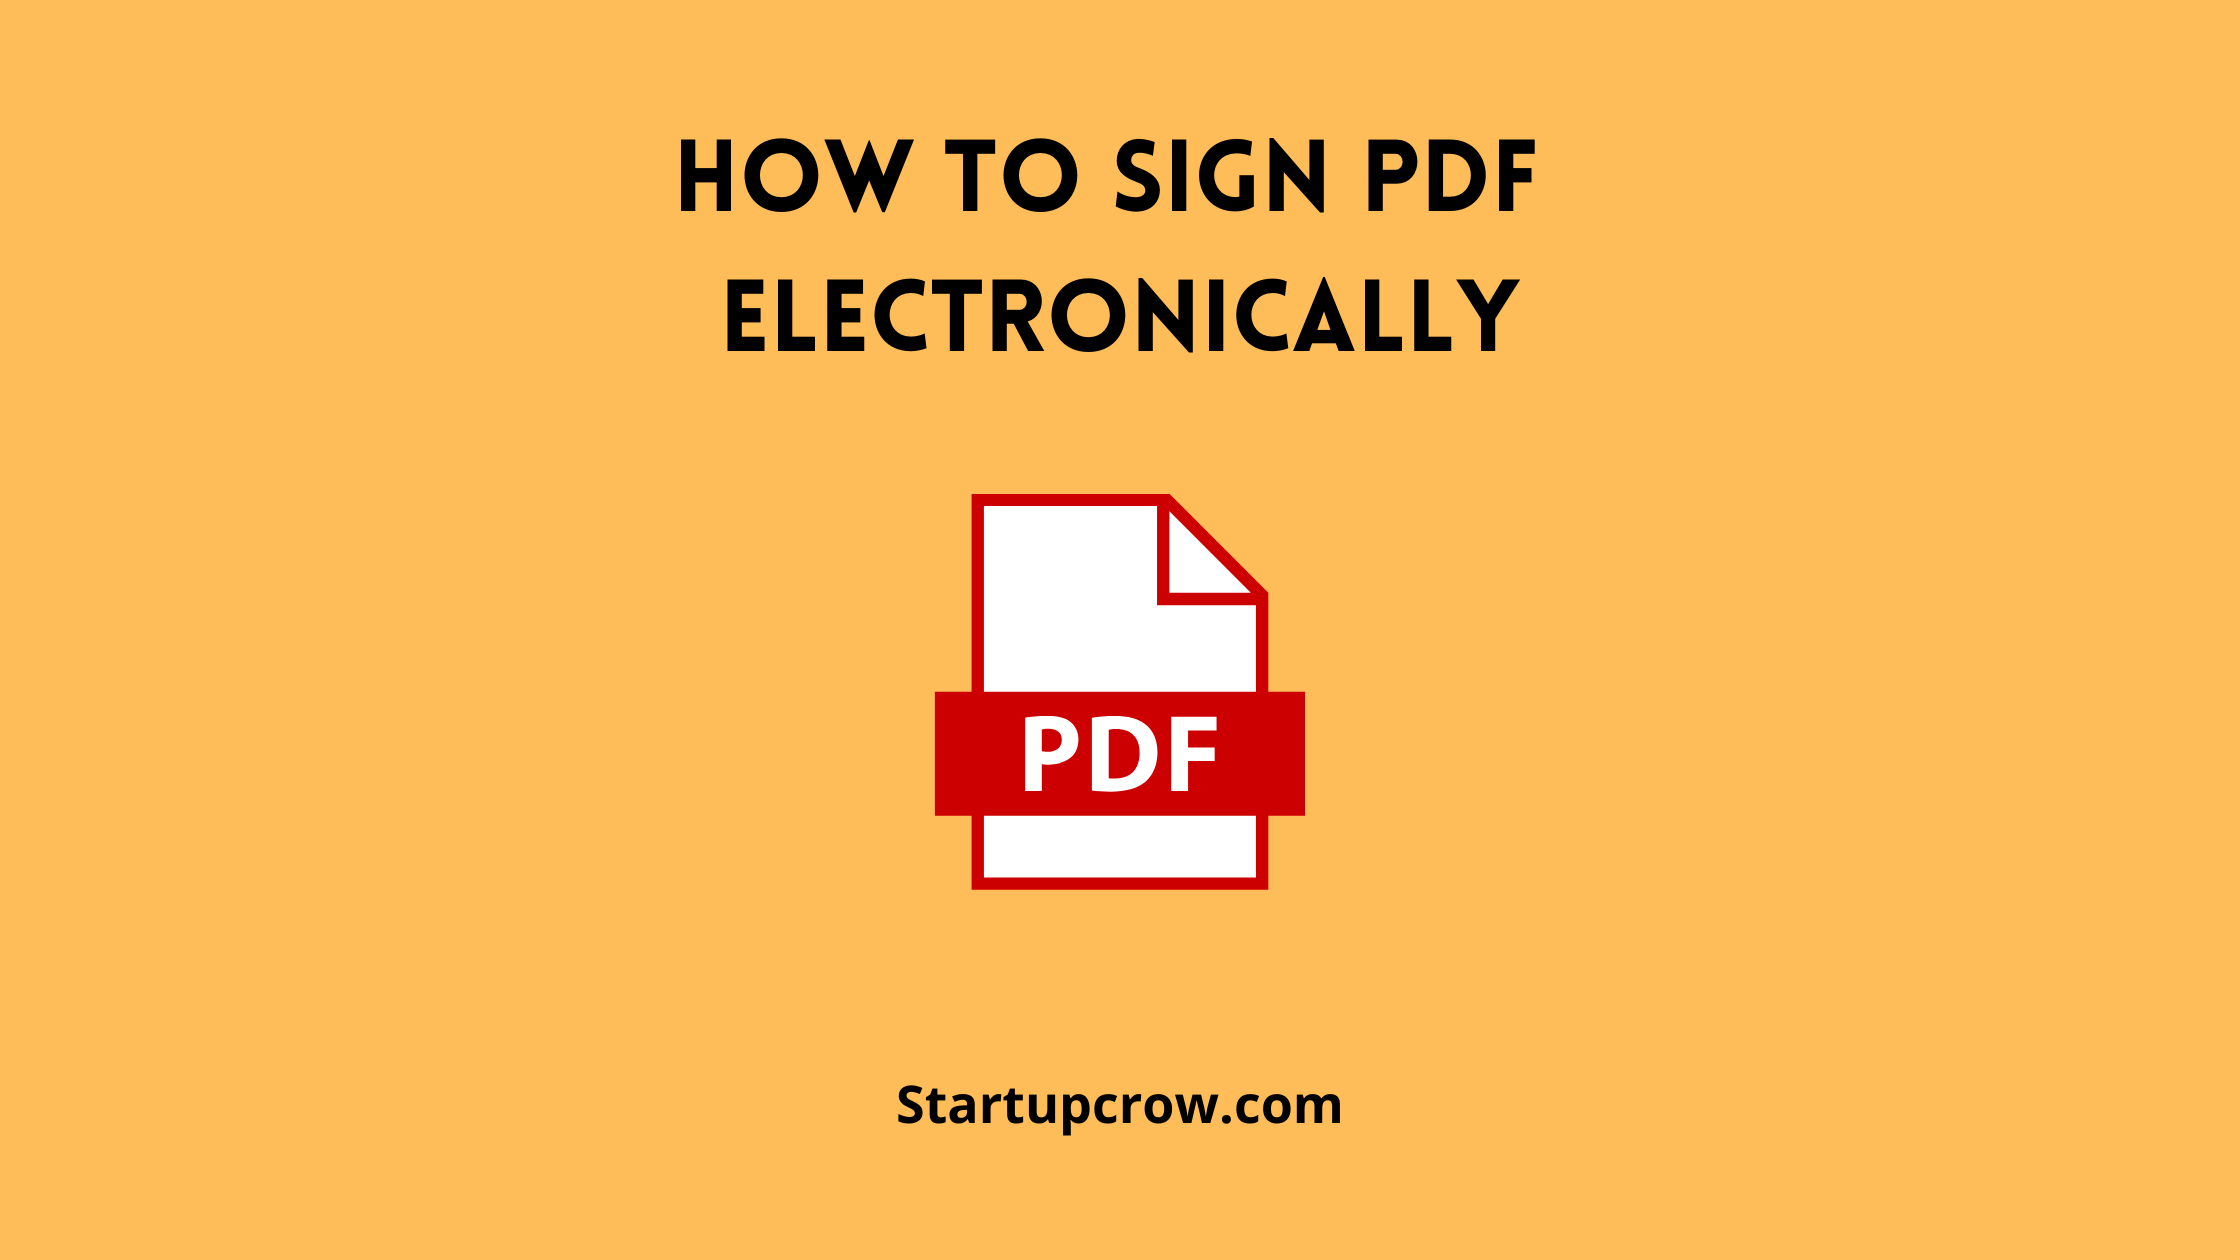 How Can I Sign PDF Documents Online?